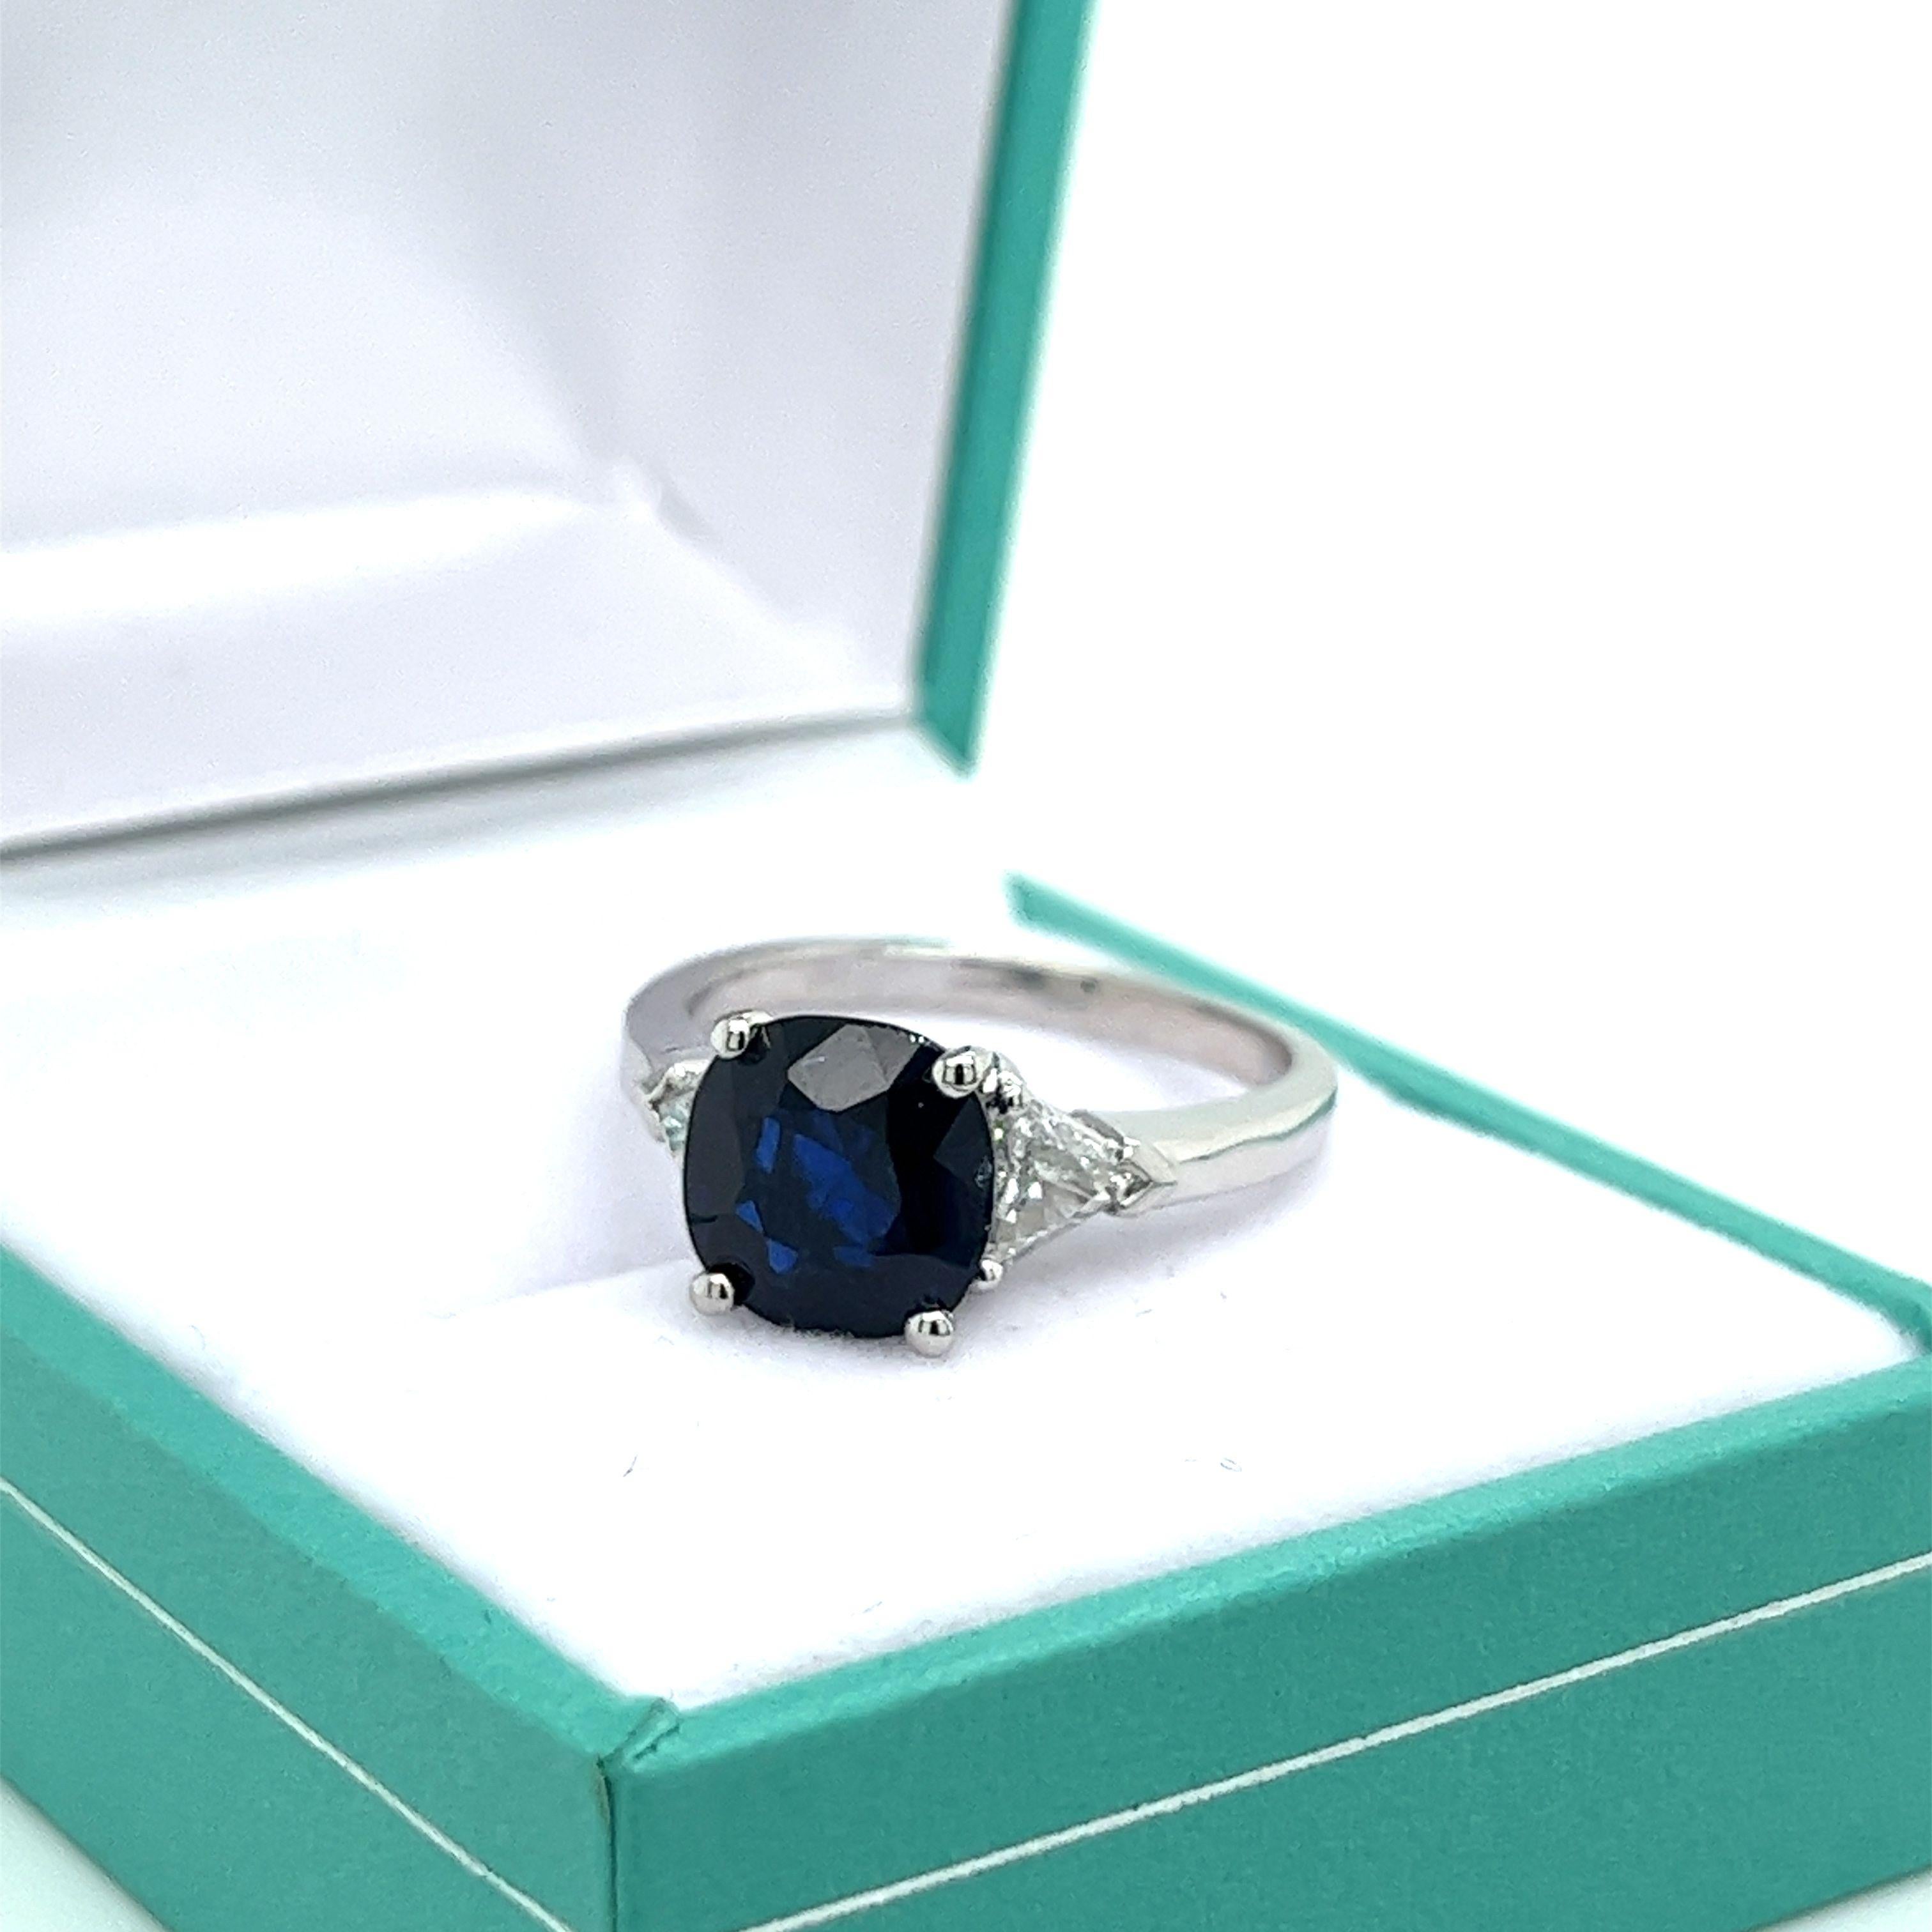 Women's GIA Certified 2.63 Carat Blue Sapphire Ring with Trillion Cut Diamond Sidestones For Sale